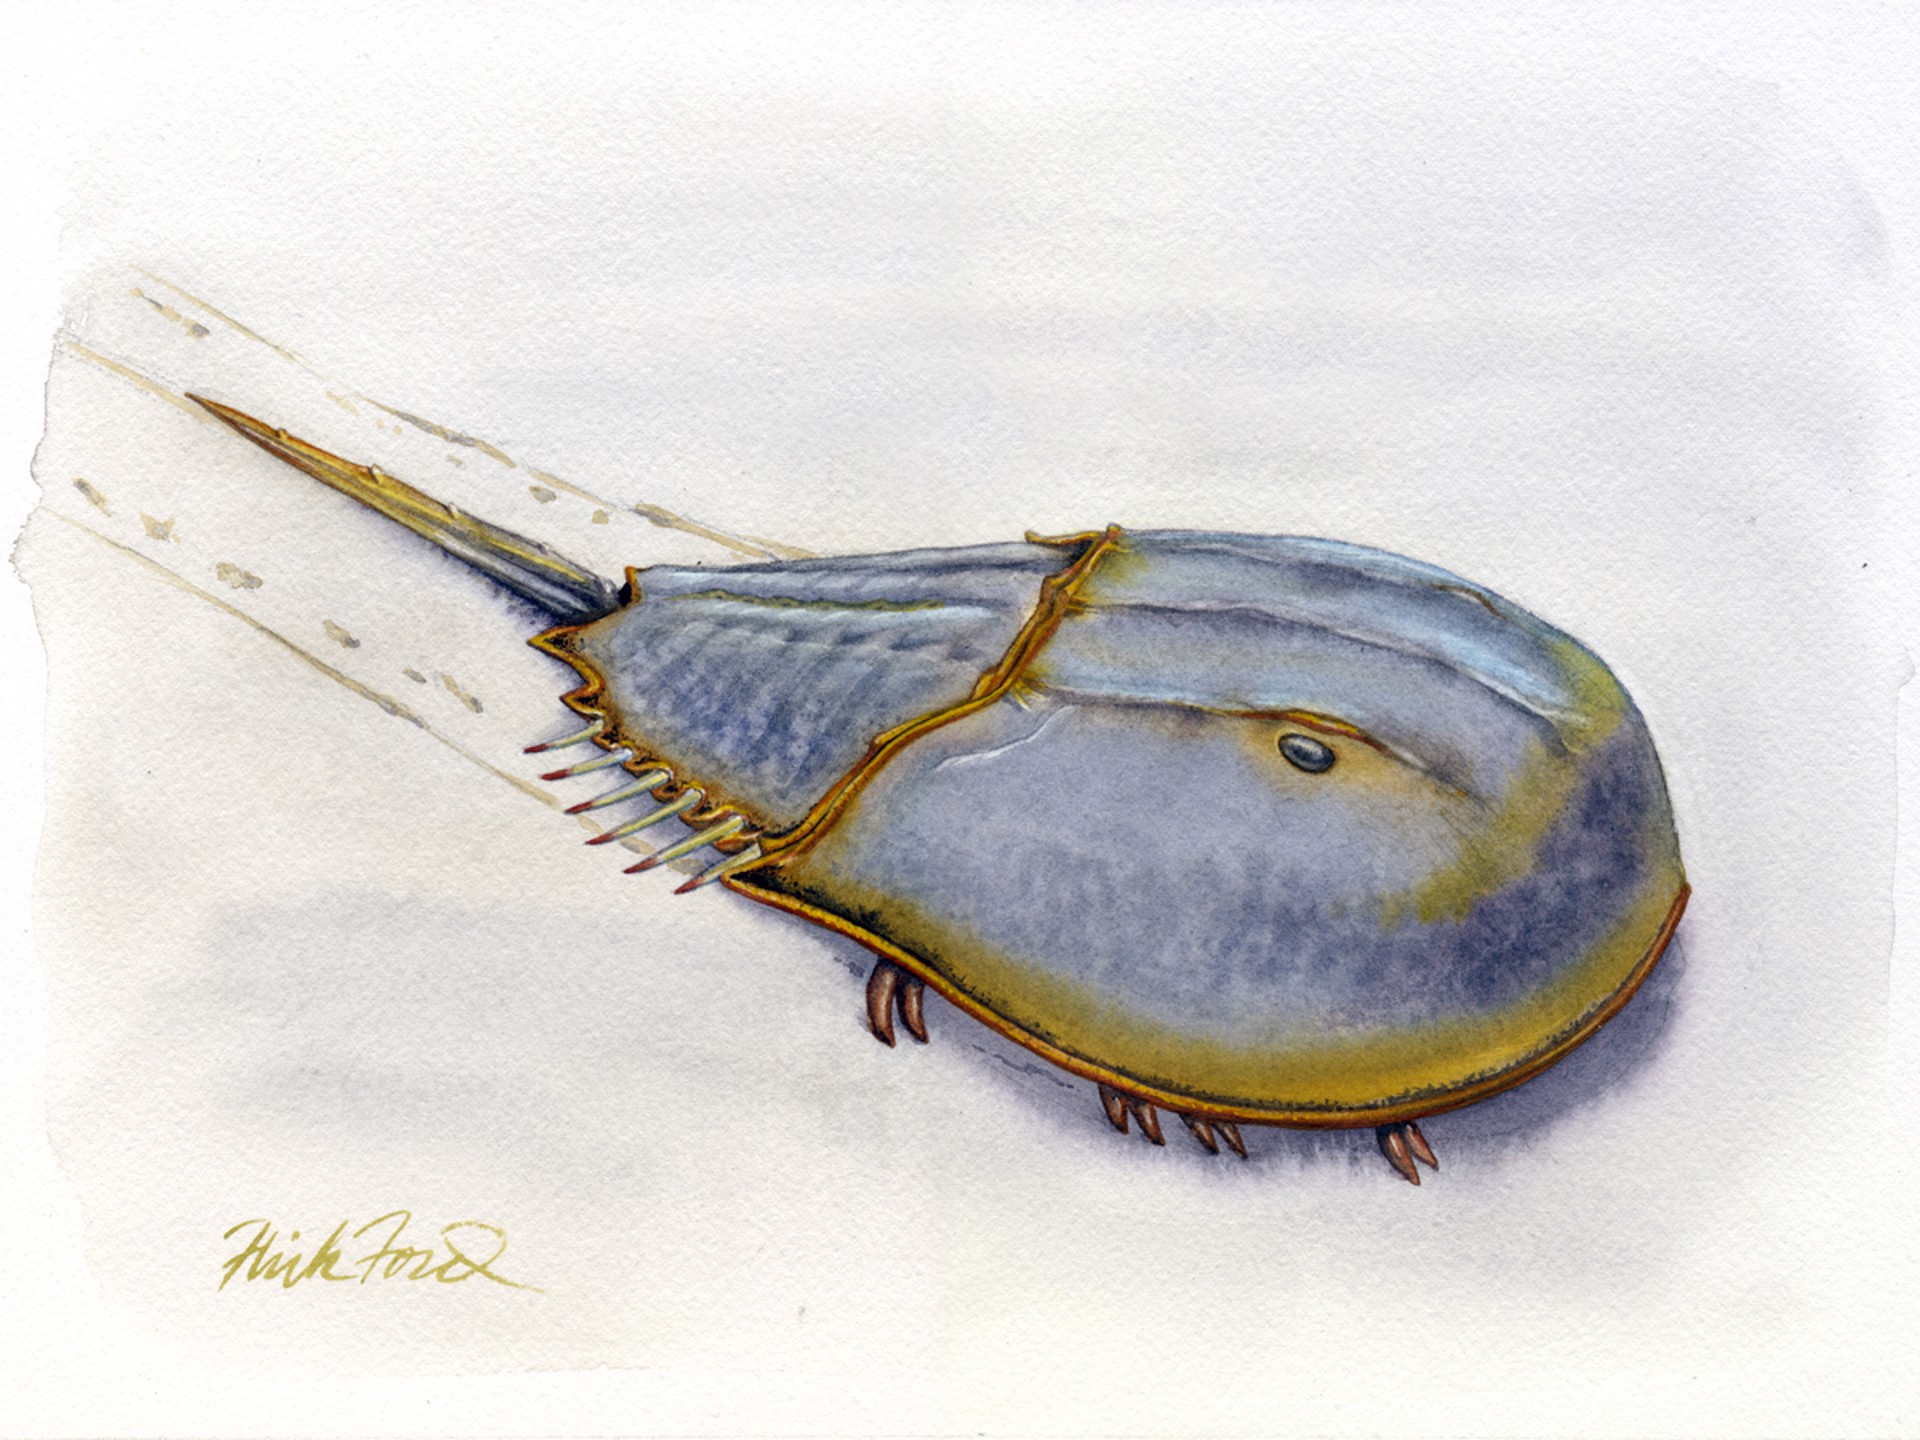 Horseshoe Crab by Flick Ford